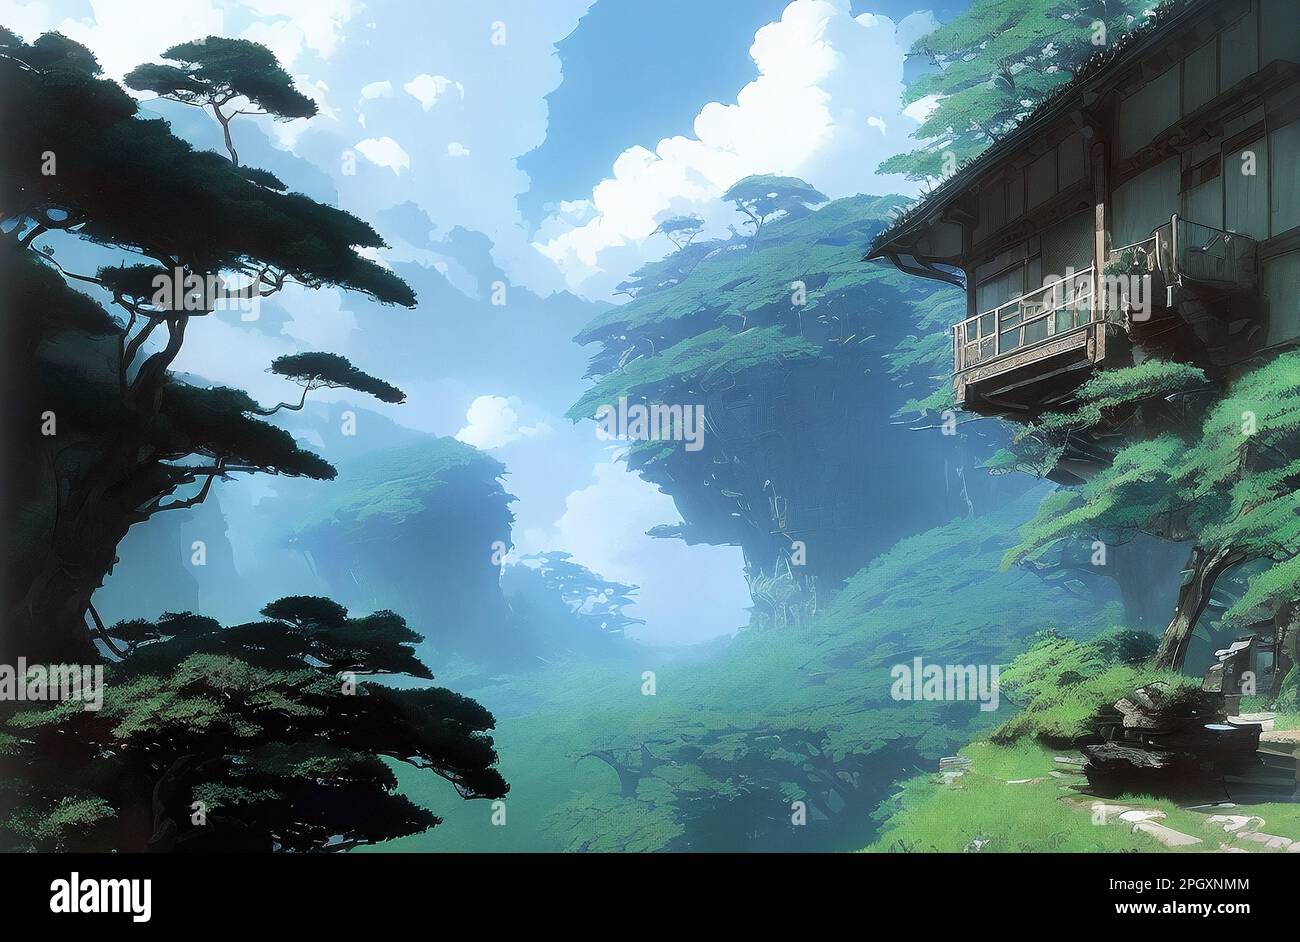 1735 Anime Nature Stock Video Footage  4K and HD Video Clips   Shutterstock